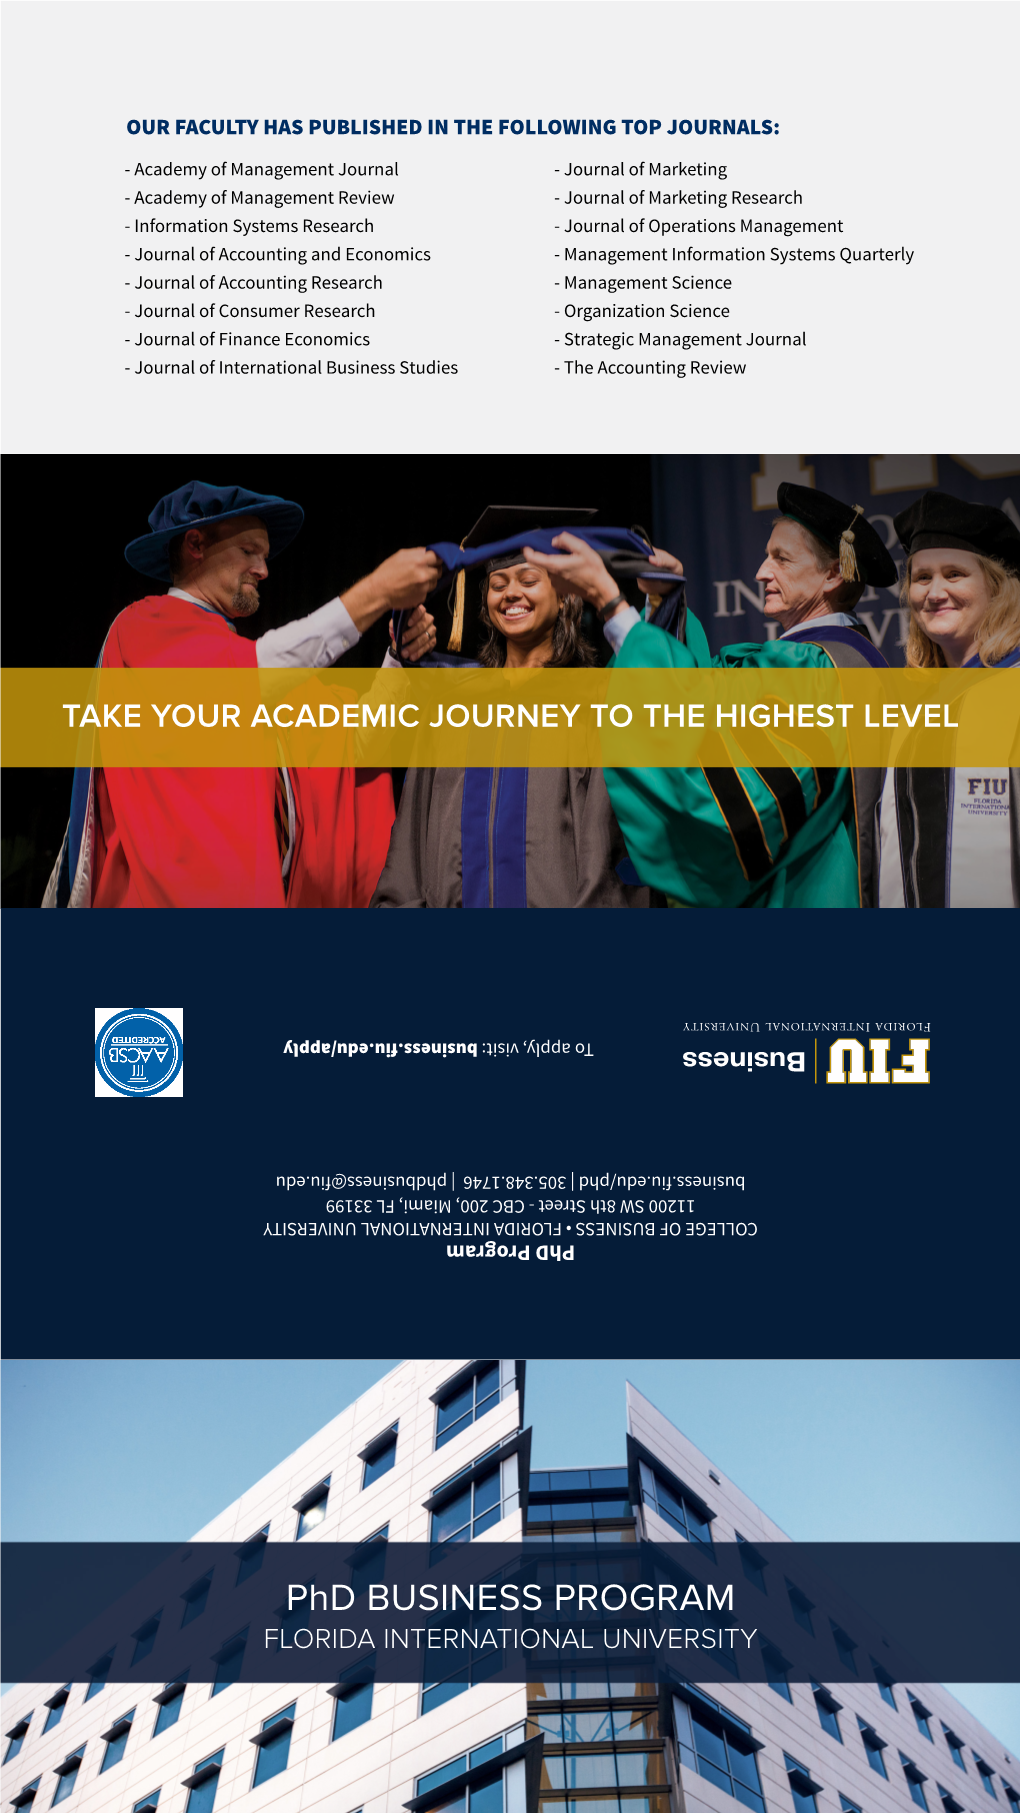 Phd BUSINESS PROGRAM FLORIDA INTERNATIONAL UNIVERSITY CHALLENGE YOURSELF at a DOCTORAL PROGRAM THAT FULLY PREPARES YOU for ACADEMIC SUCCESS